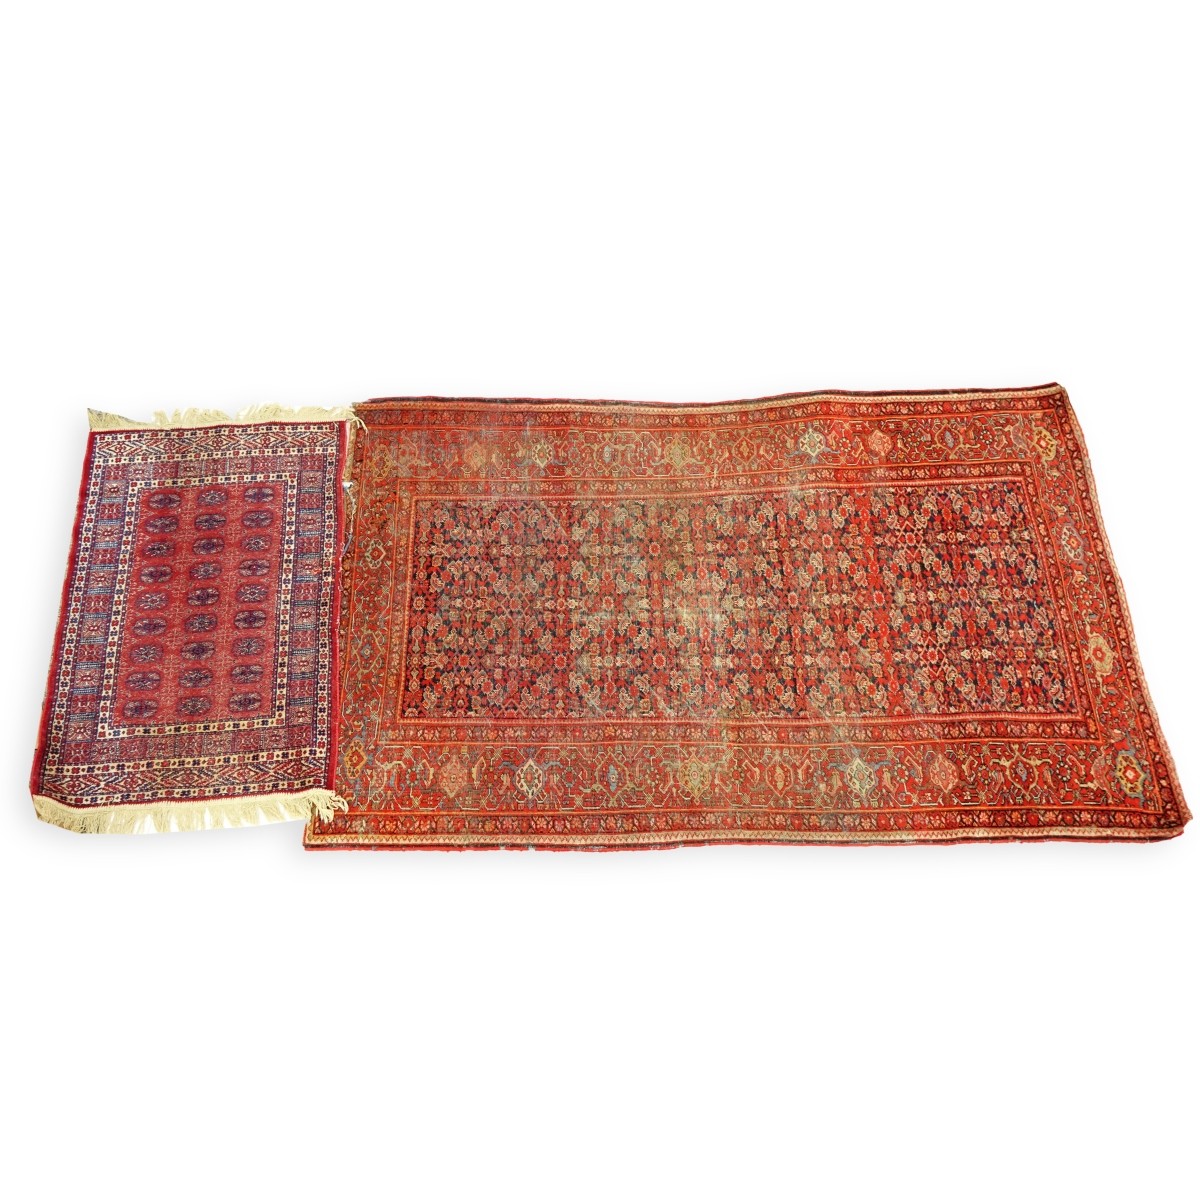 Two (2) Middle Eastern Rugs